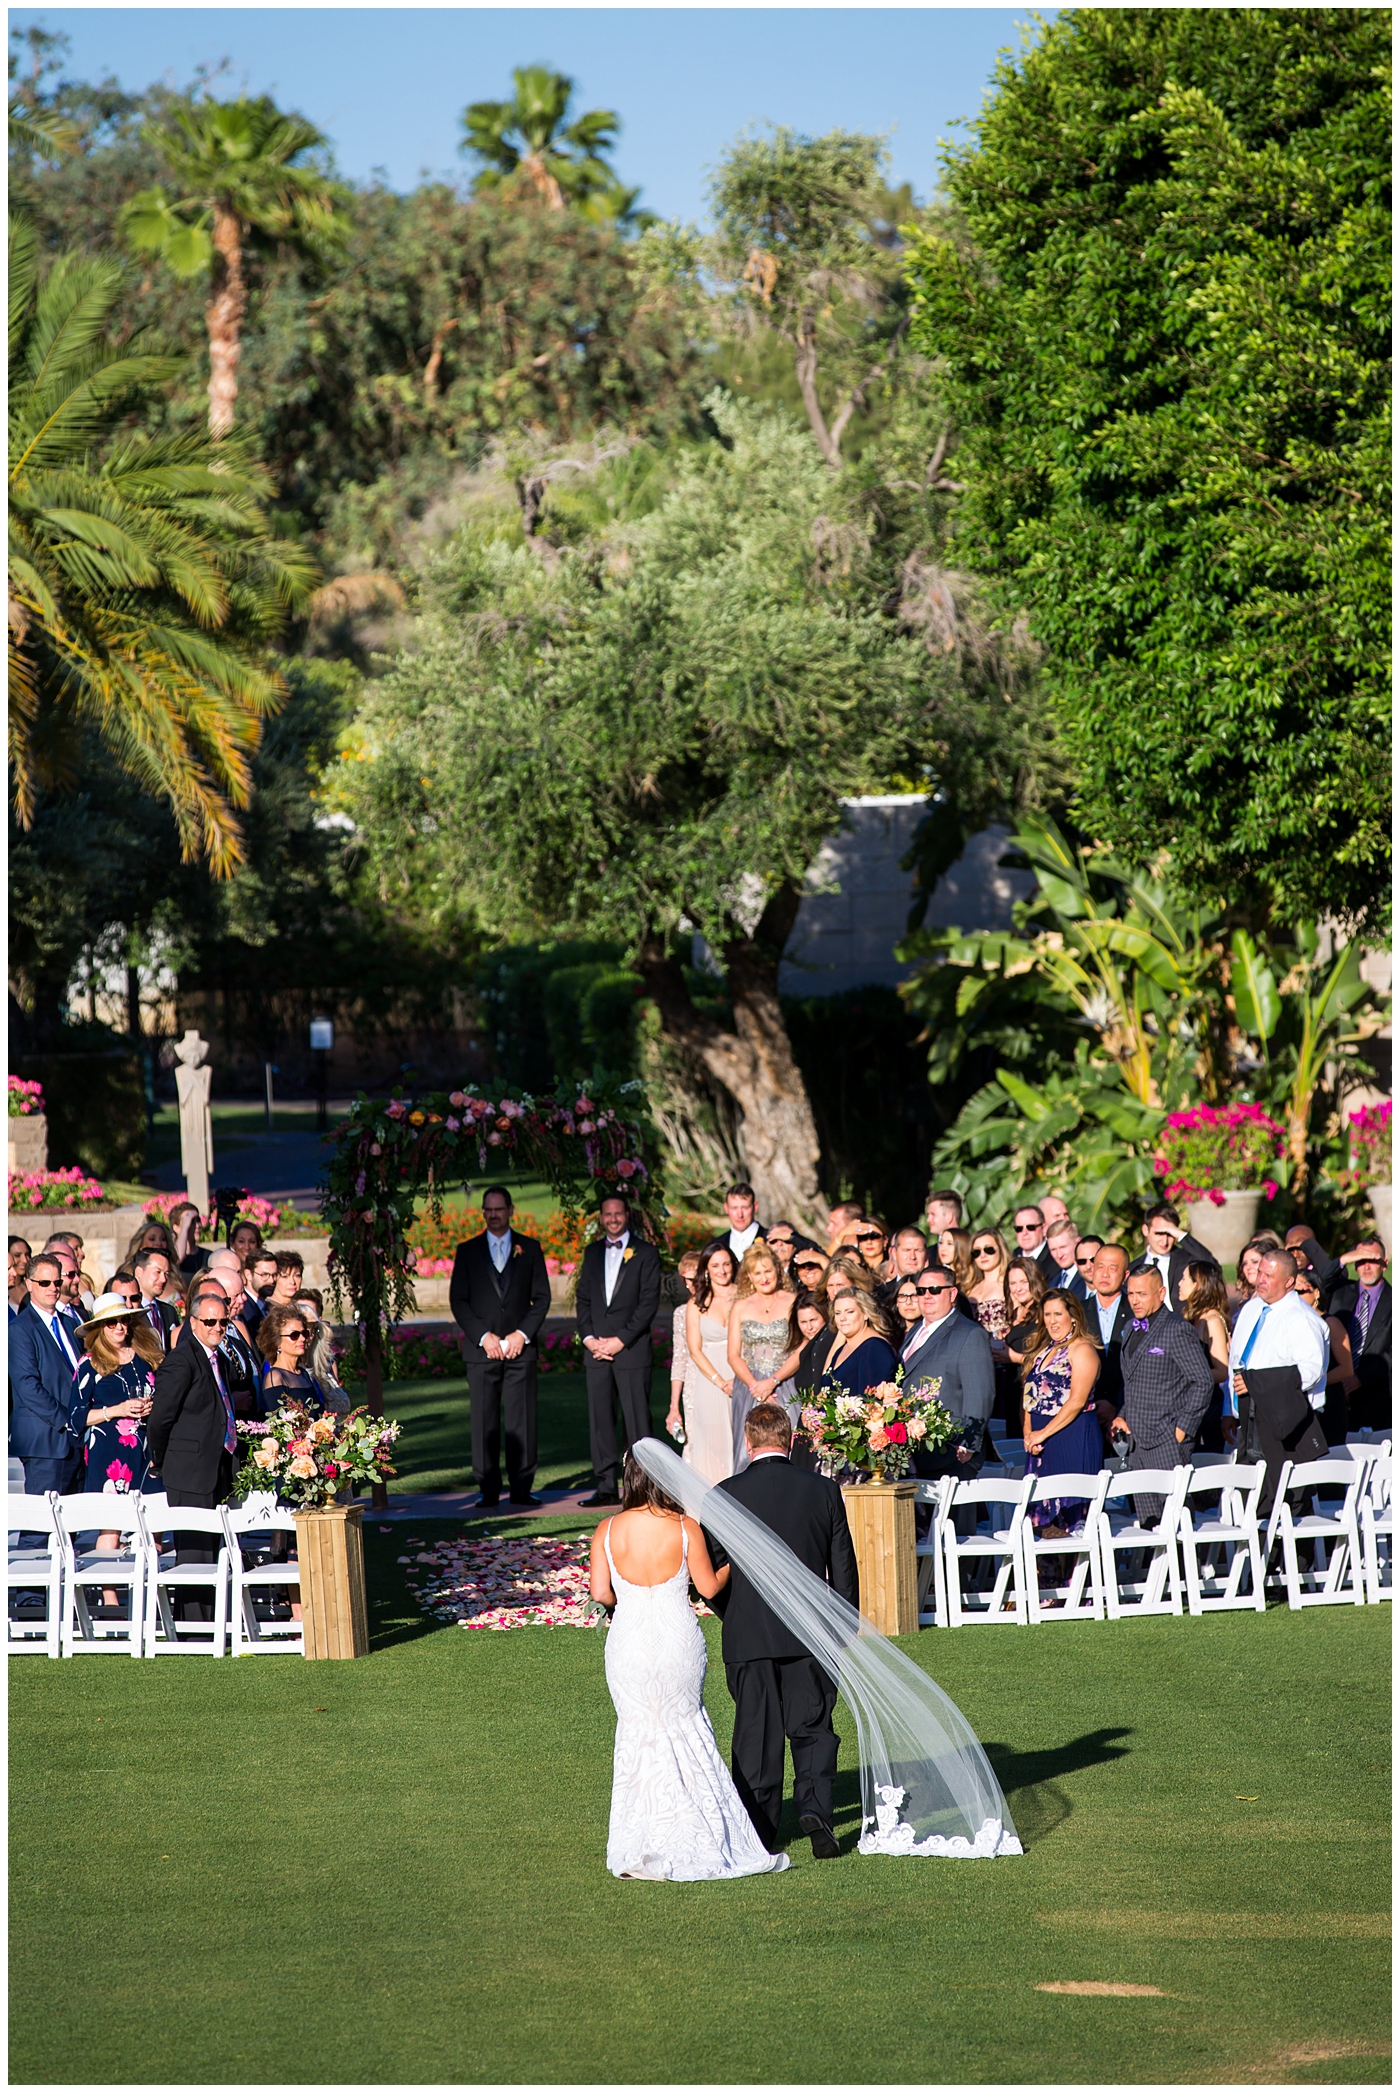 bride walking down the aisle at outdoor wedding ceremony